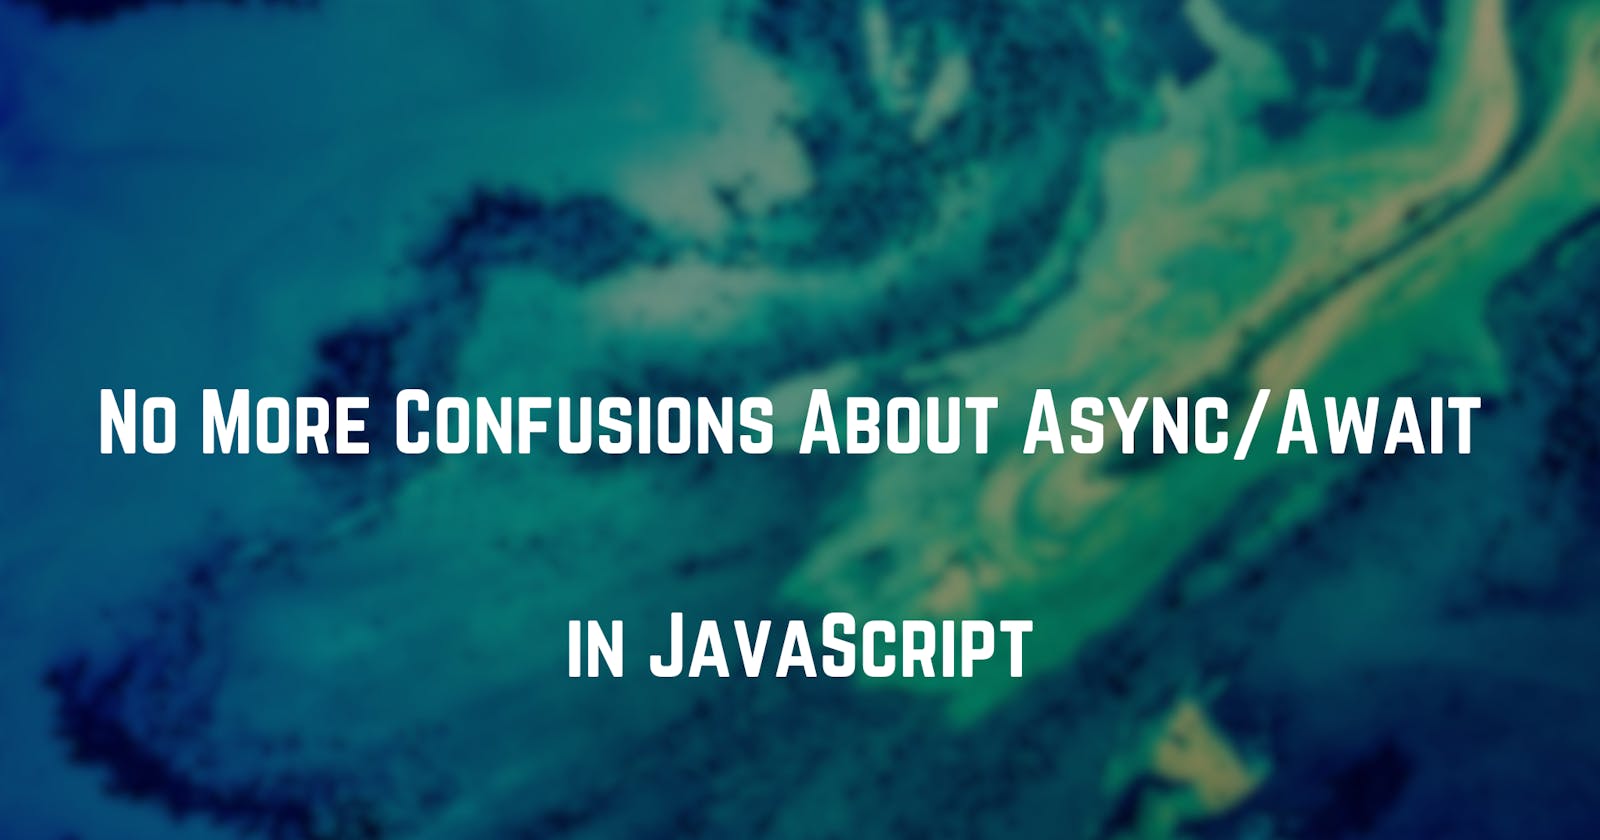 No More Confusions About Async/Await in JavaScript